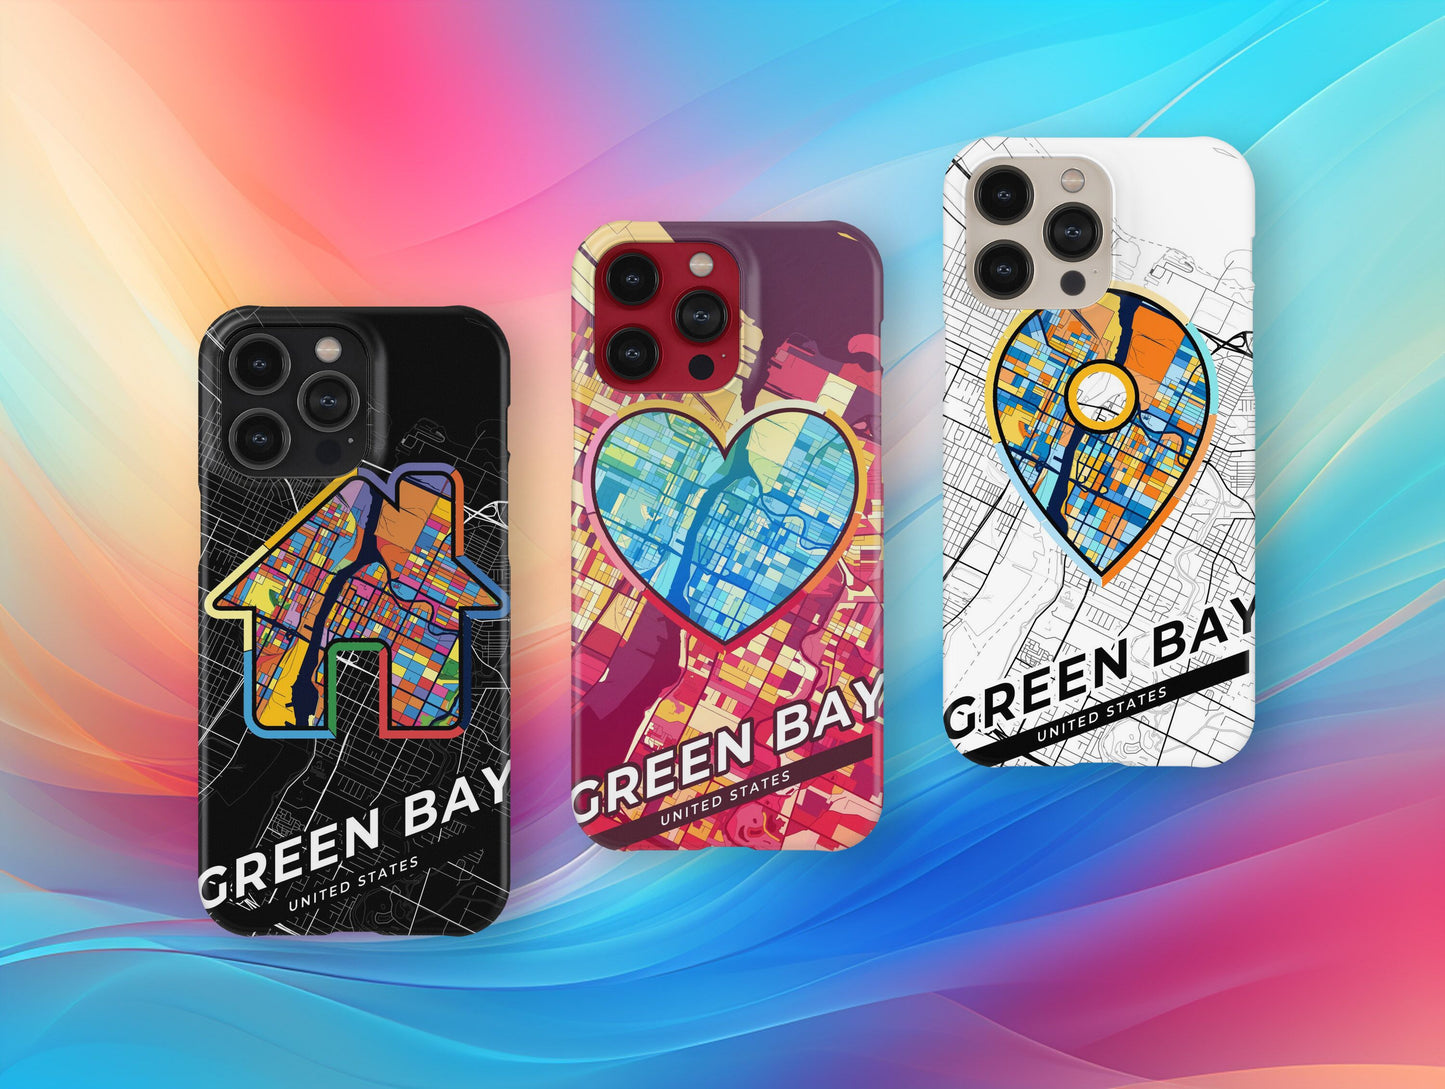 Green Bay Wisconsin slim phone case with colorful icon. Birthday, wedding or housewarming gift. Couple match cases.